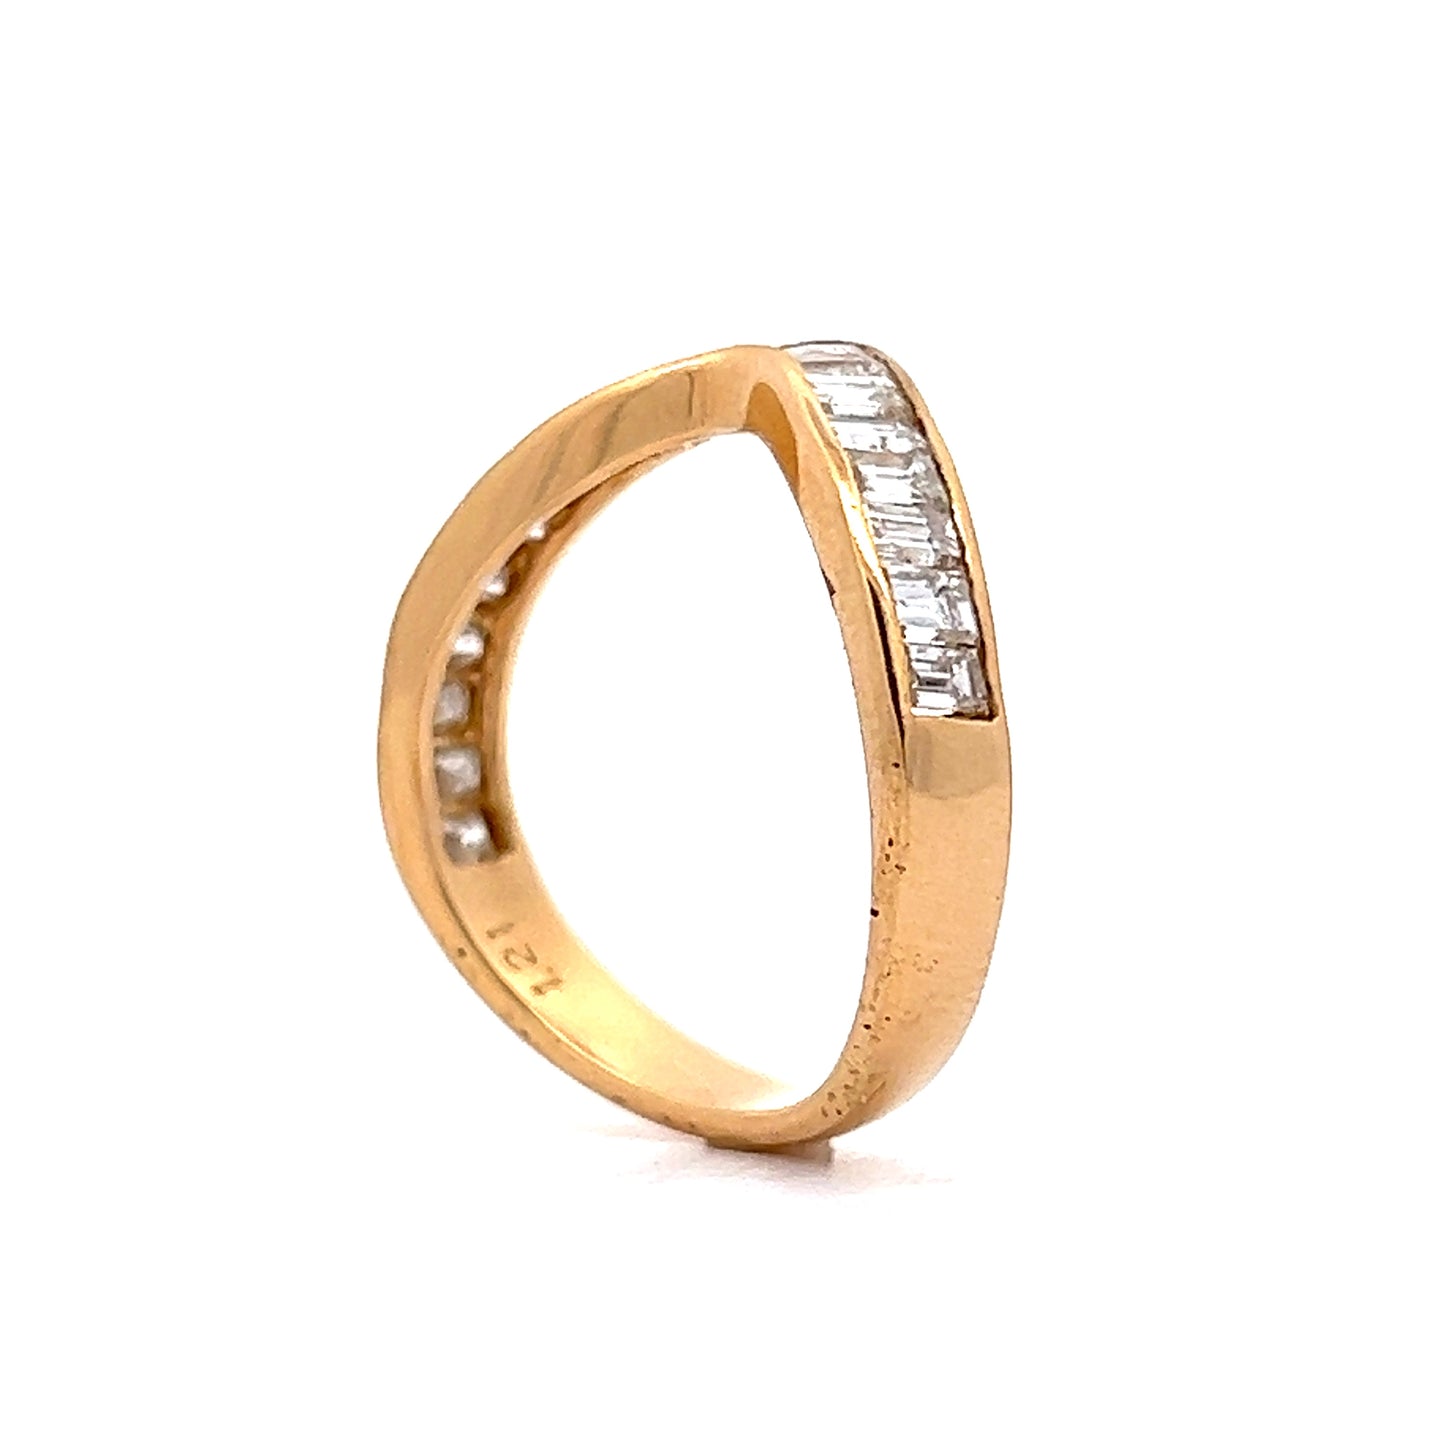 1.08 Baguette Diamond Contoured Wedding Band in 18k Yellow Gold